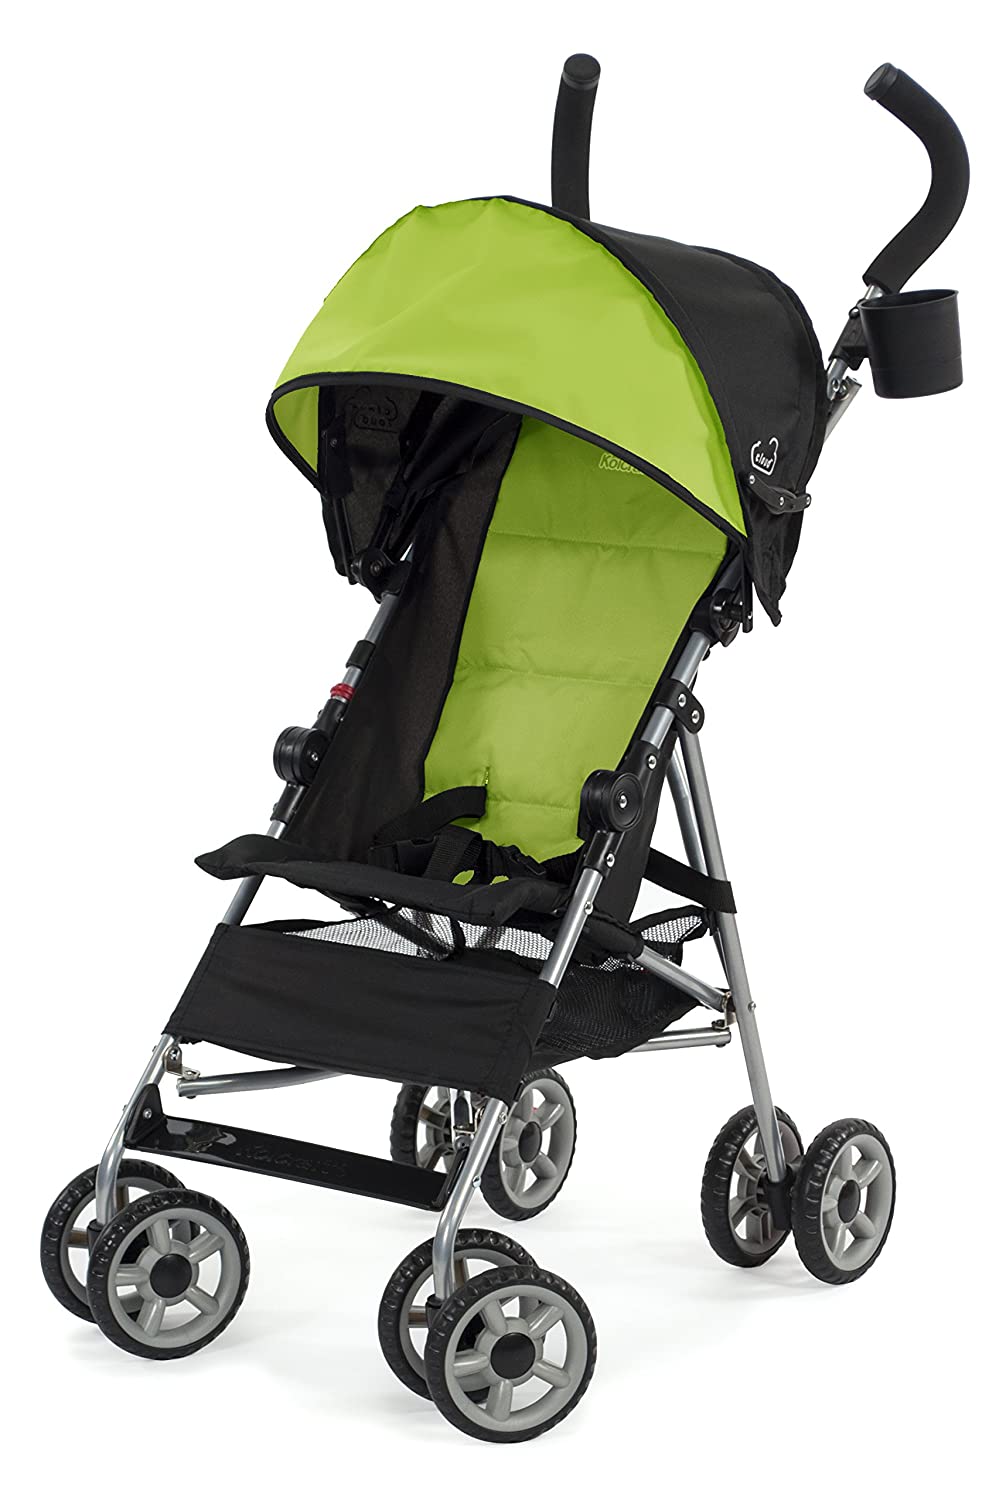 10 Best Umbrella Strollers for Toddler Reviews of 2022 1